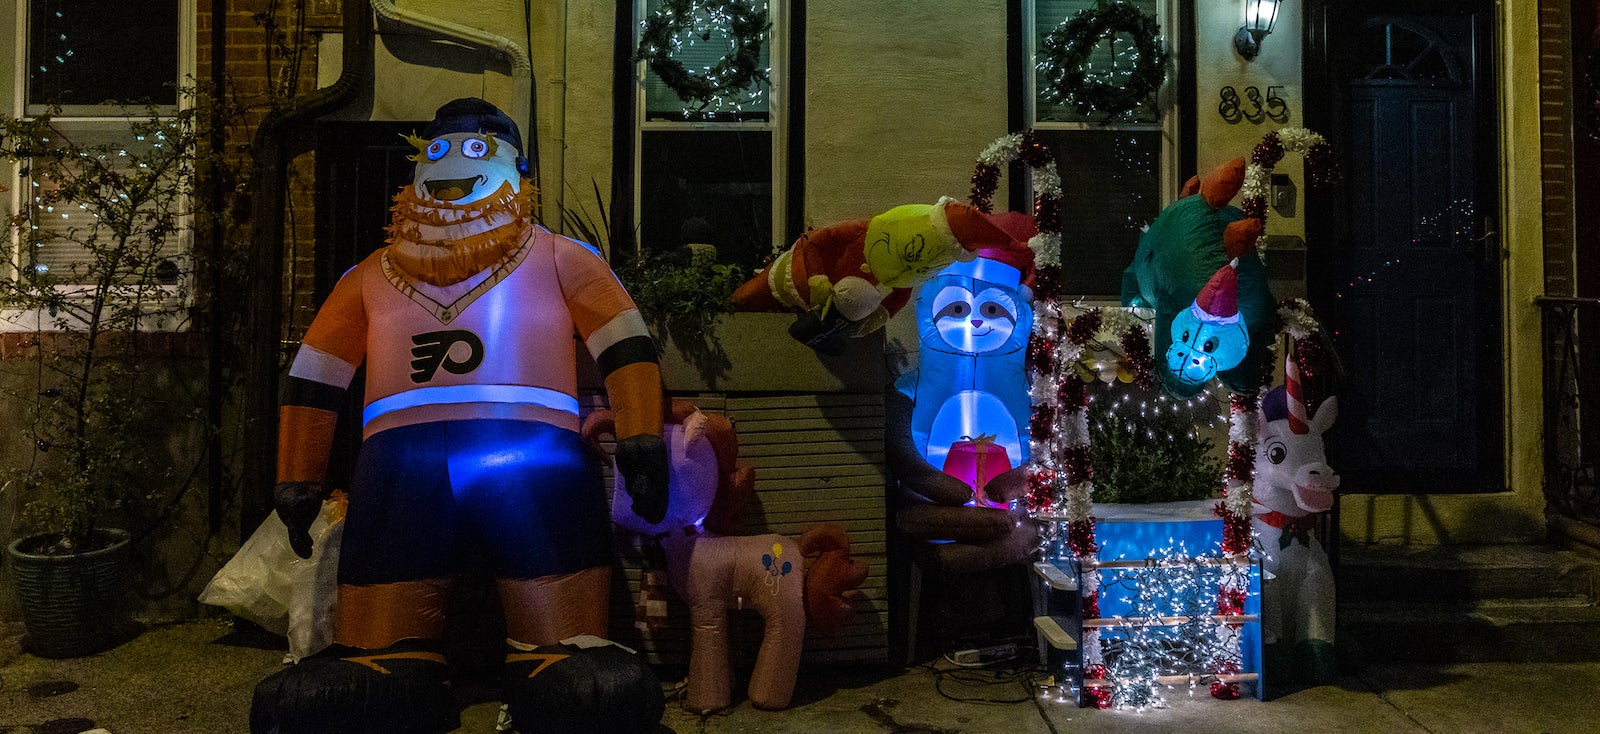 A blow-up Gritty appears amid holiday decorations outside a South Philly rowhouse